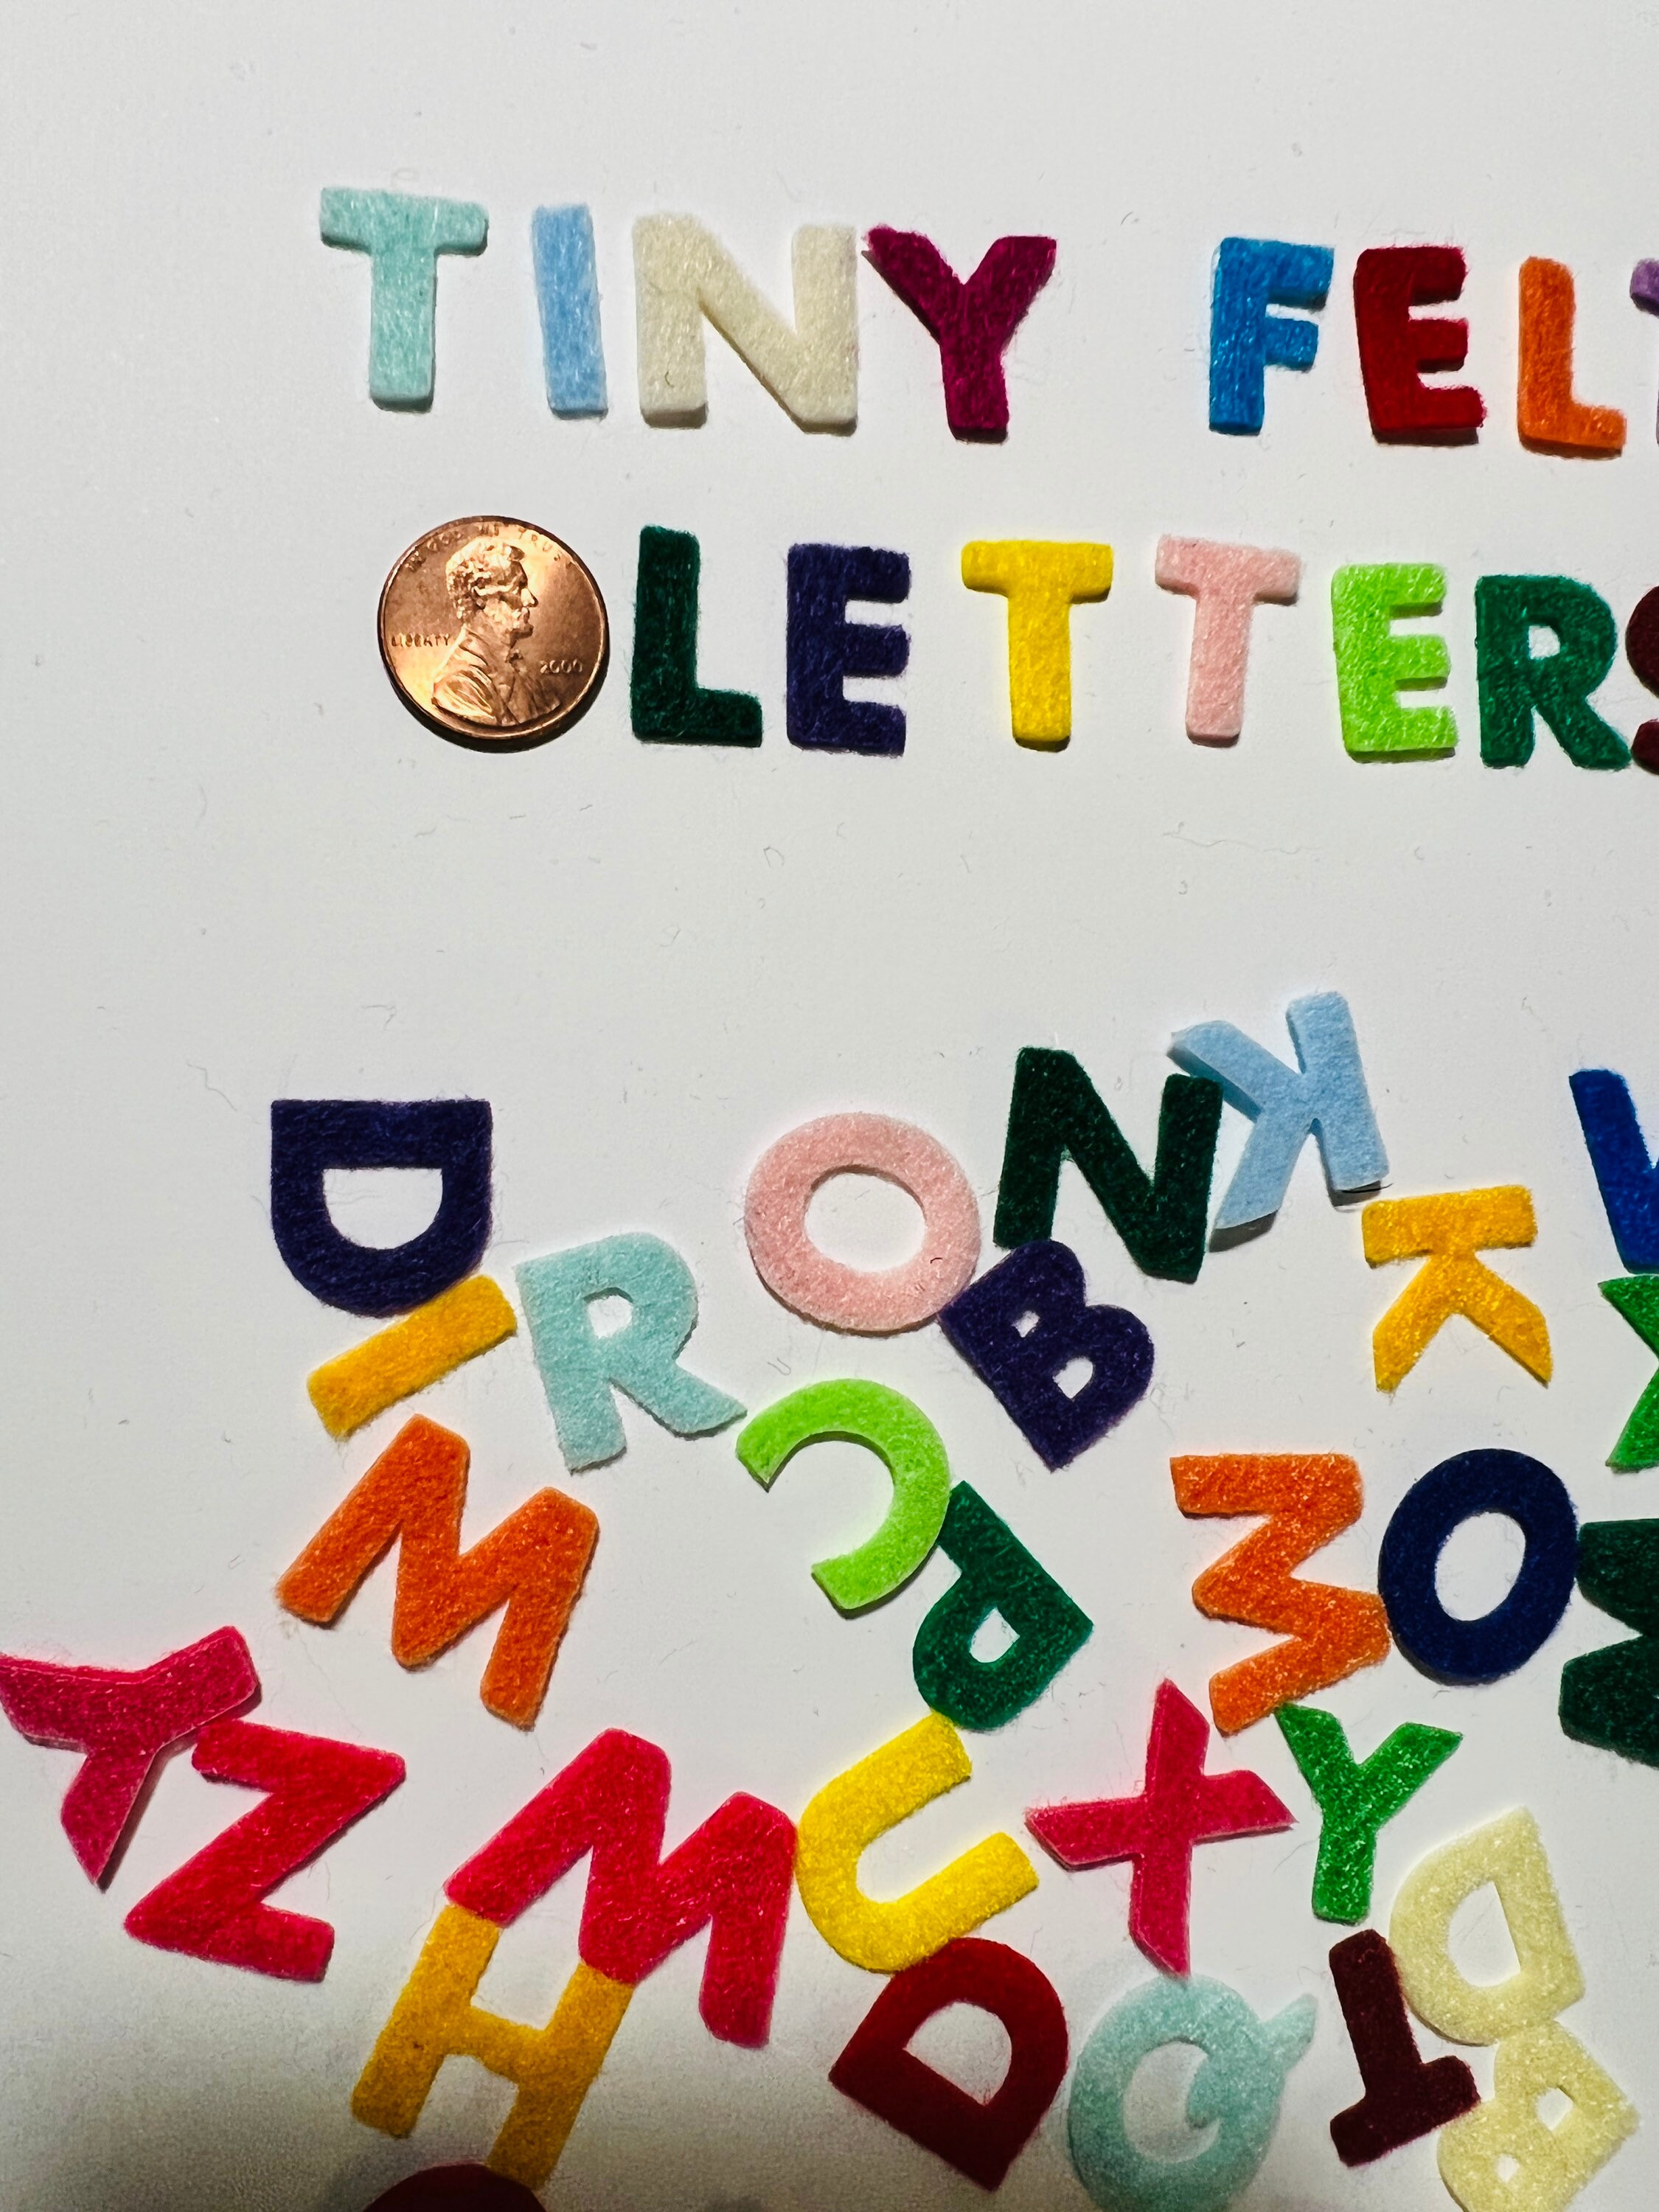 Stick on Letters, Adhesive Backed Felt Letters, Peel and Stick Die Cut  Alphabet, 2 Inch Sticky Capital Letters for Educational Activities 